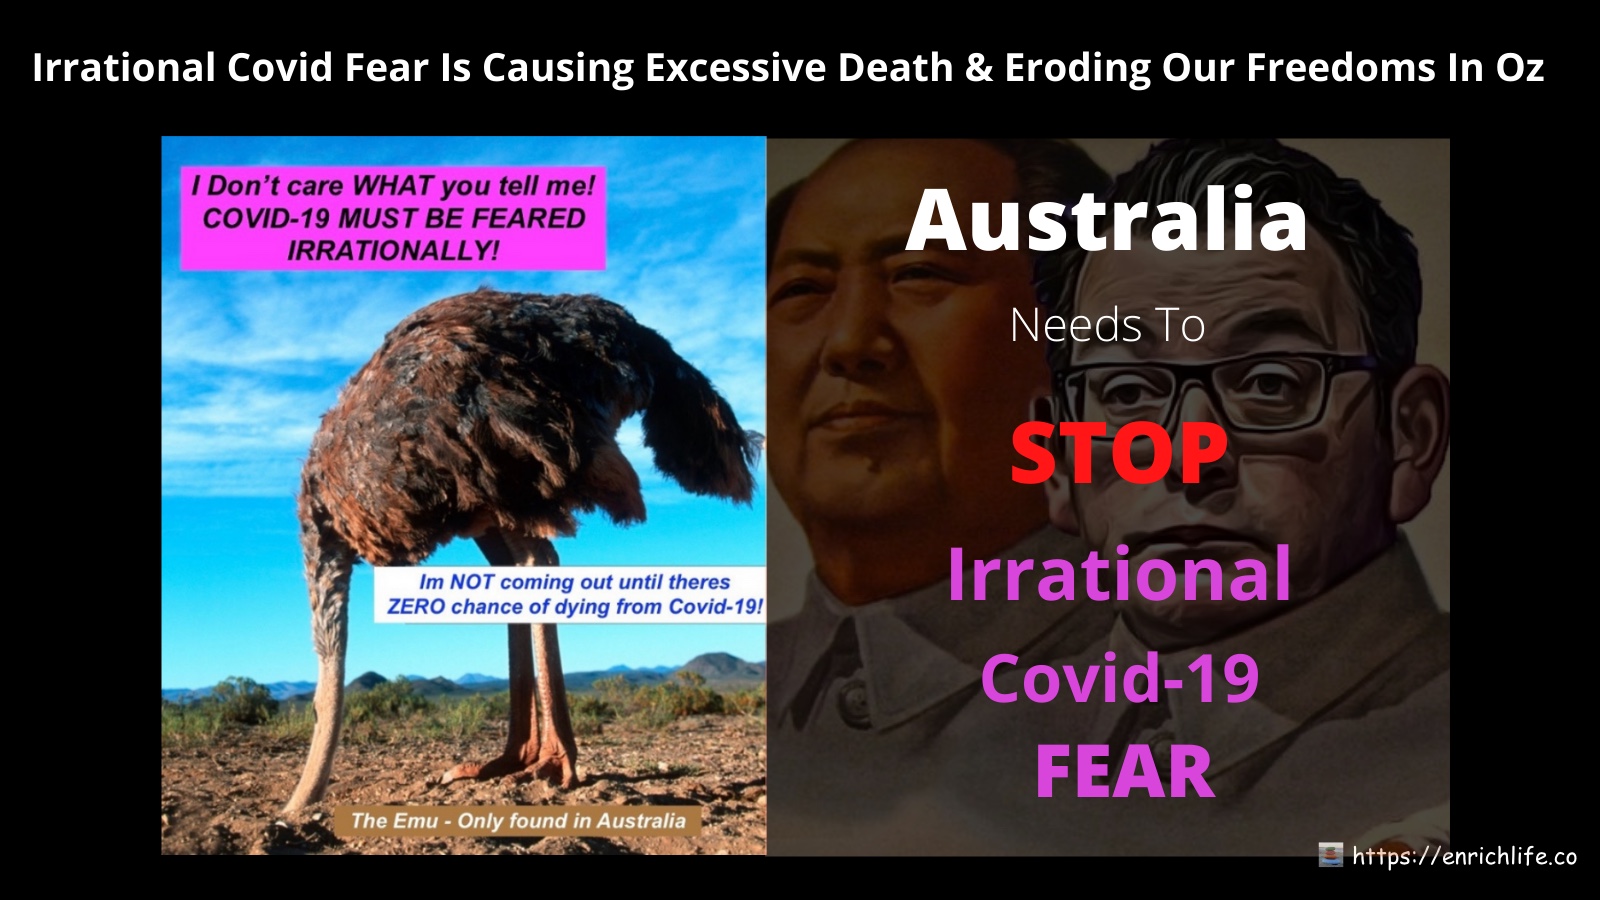 Irrational Covid Fear Is Causing Excessive Death & Eroding Our Freedoms In Oz